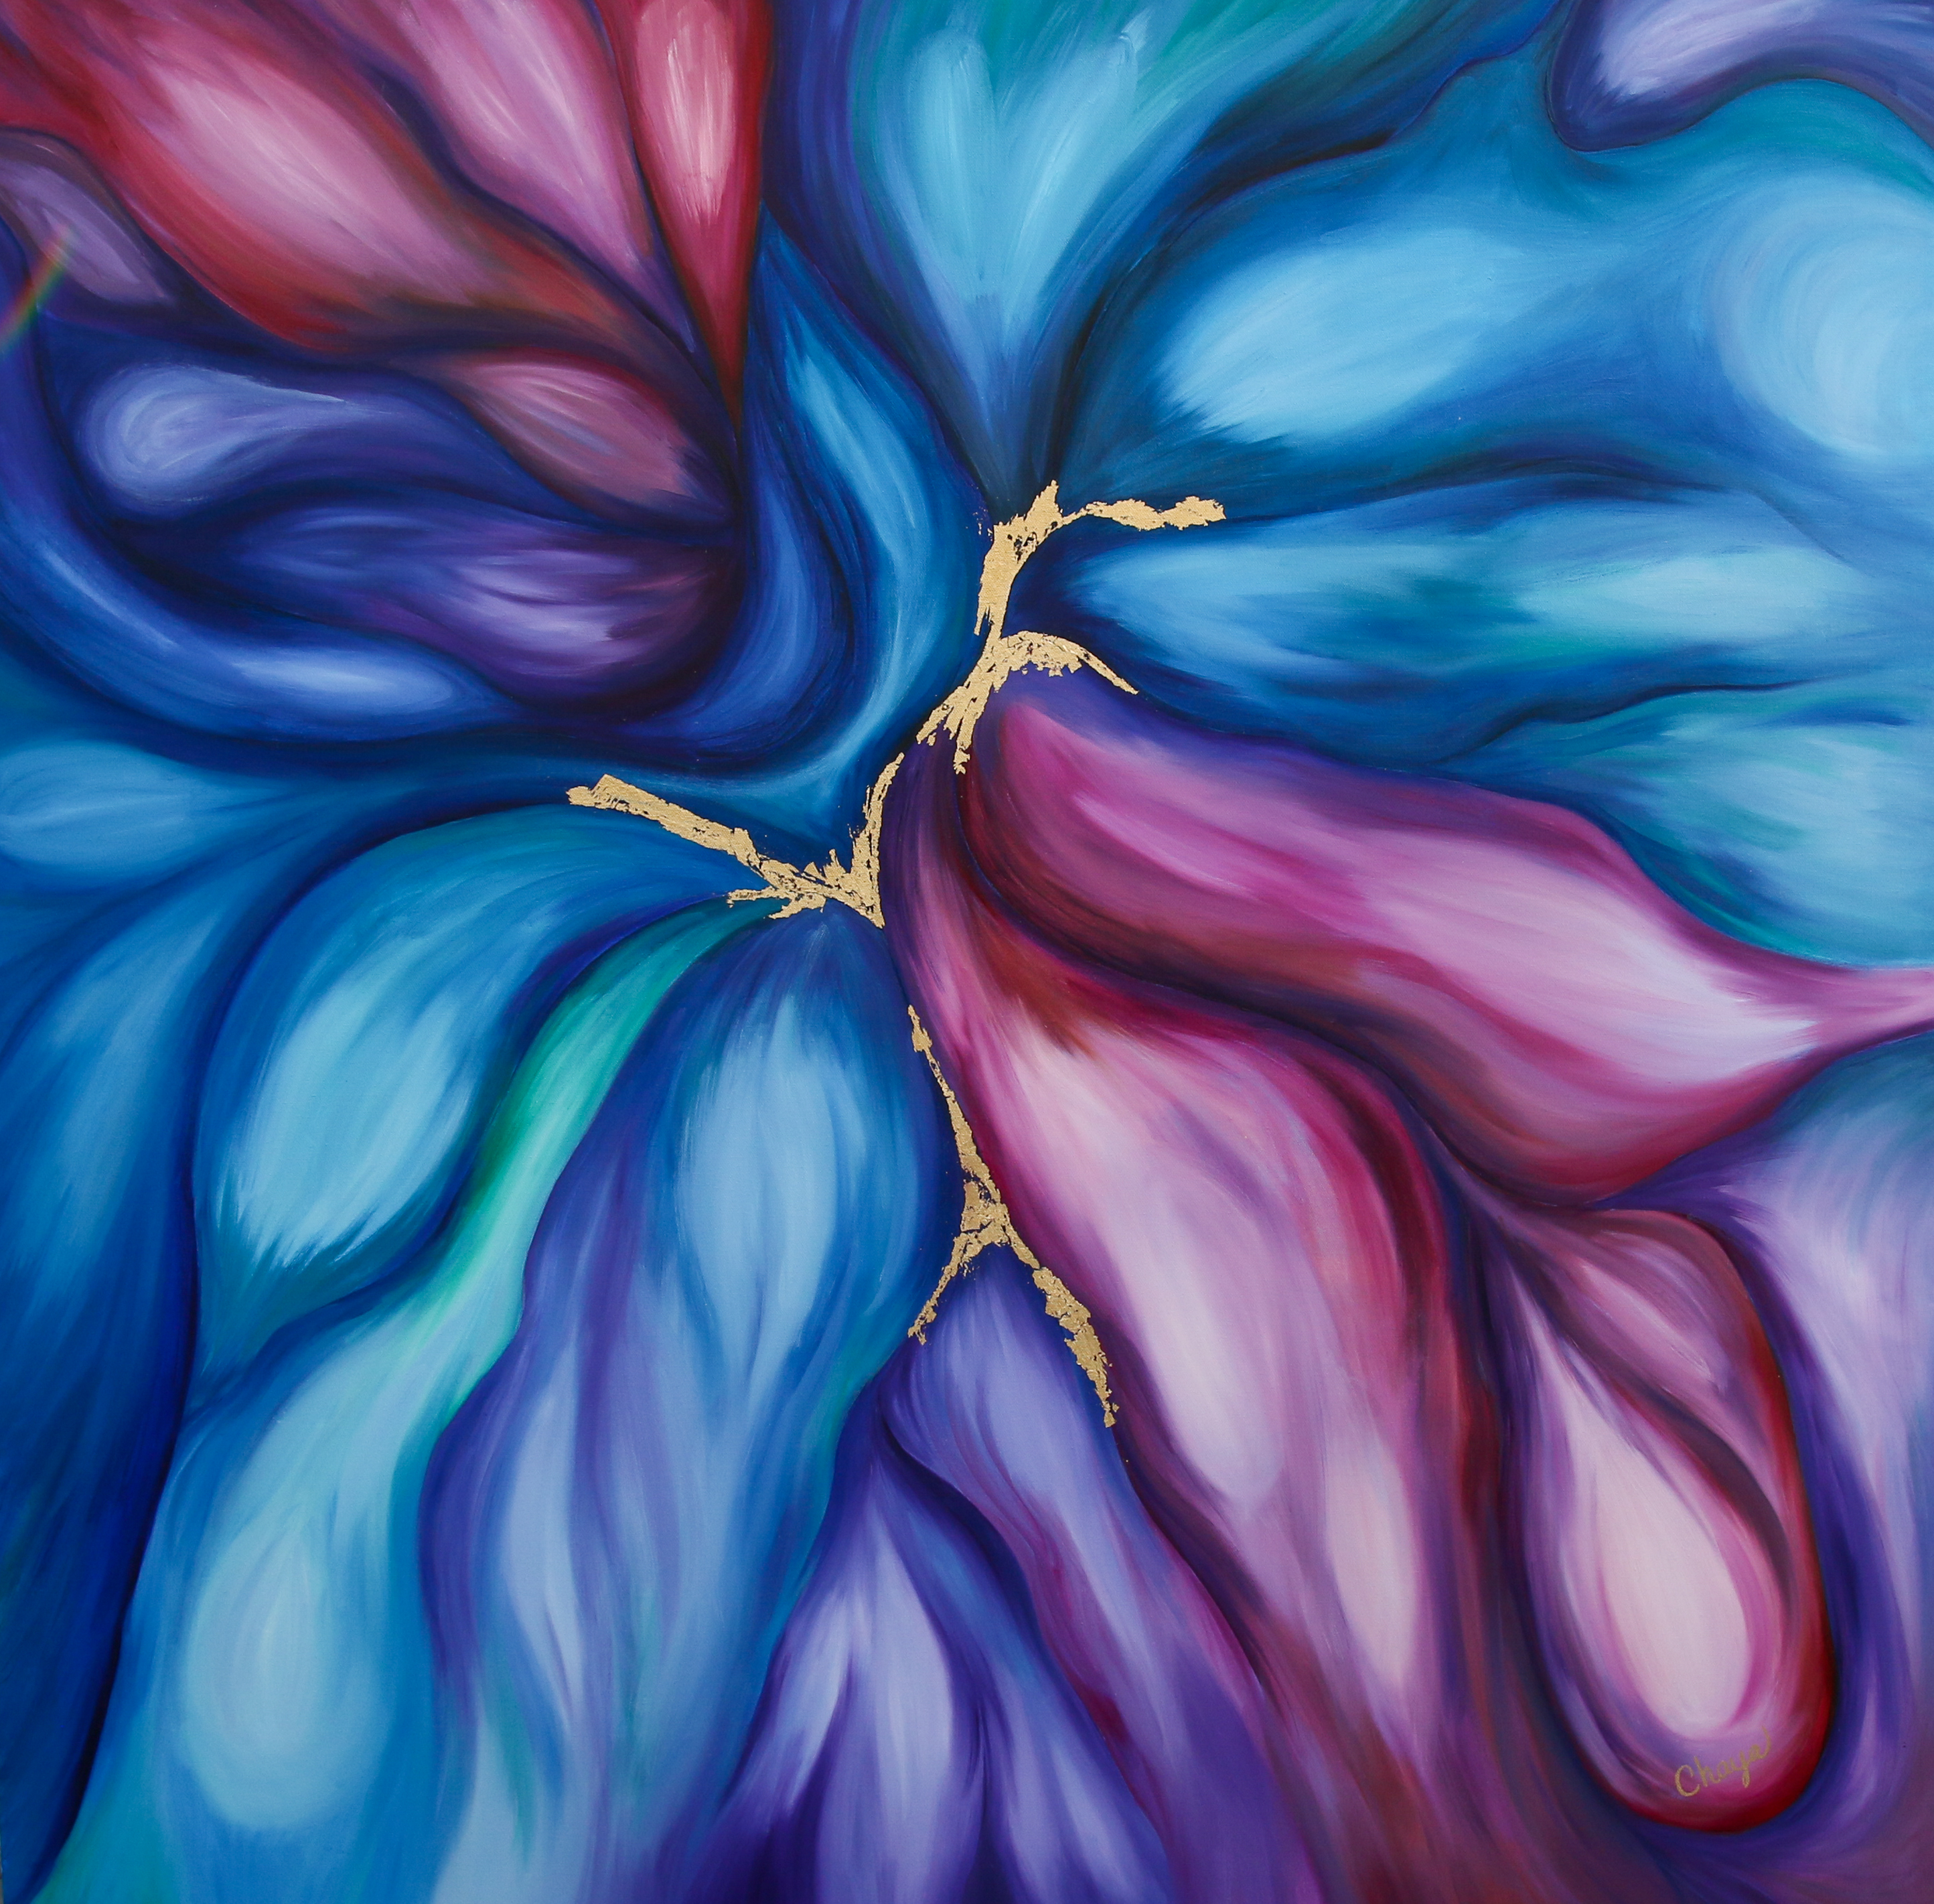 <h9>Abstract Flower</h9>